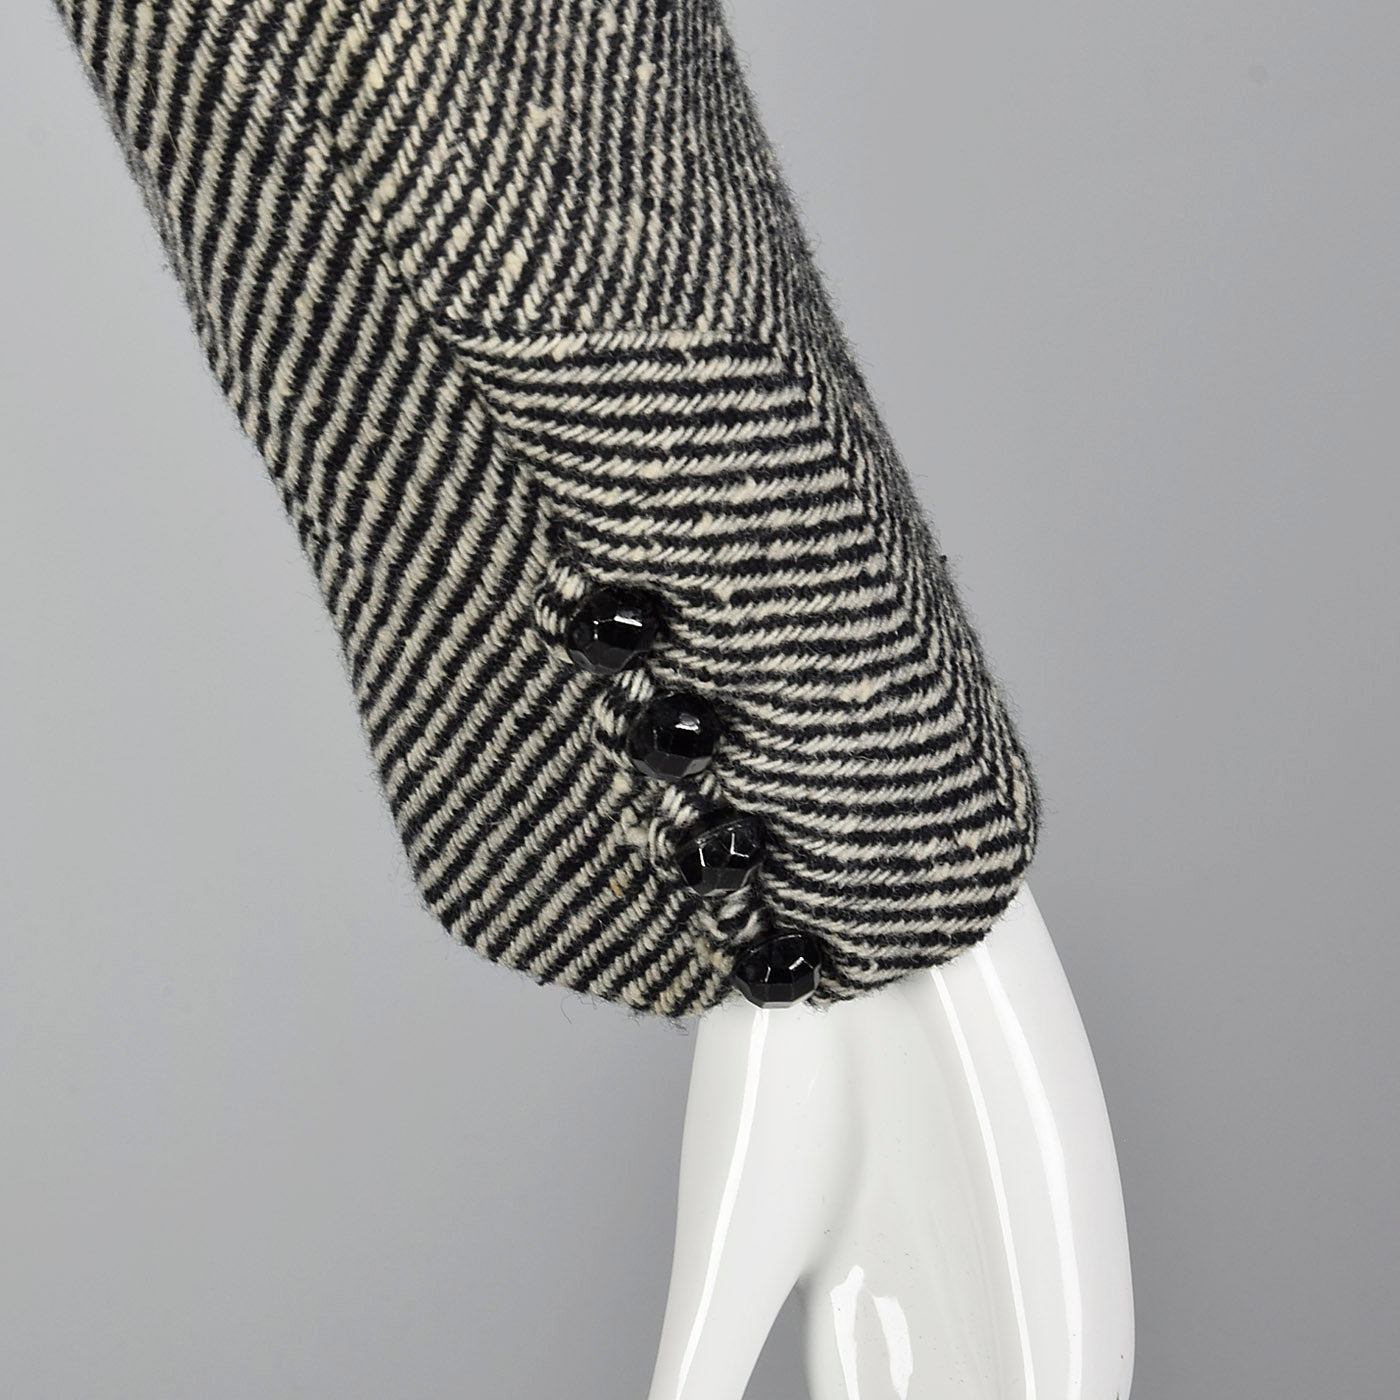 1960s Black and White Stripe Skirt Suit with Scarf